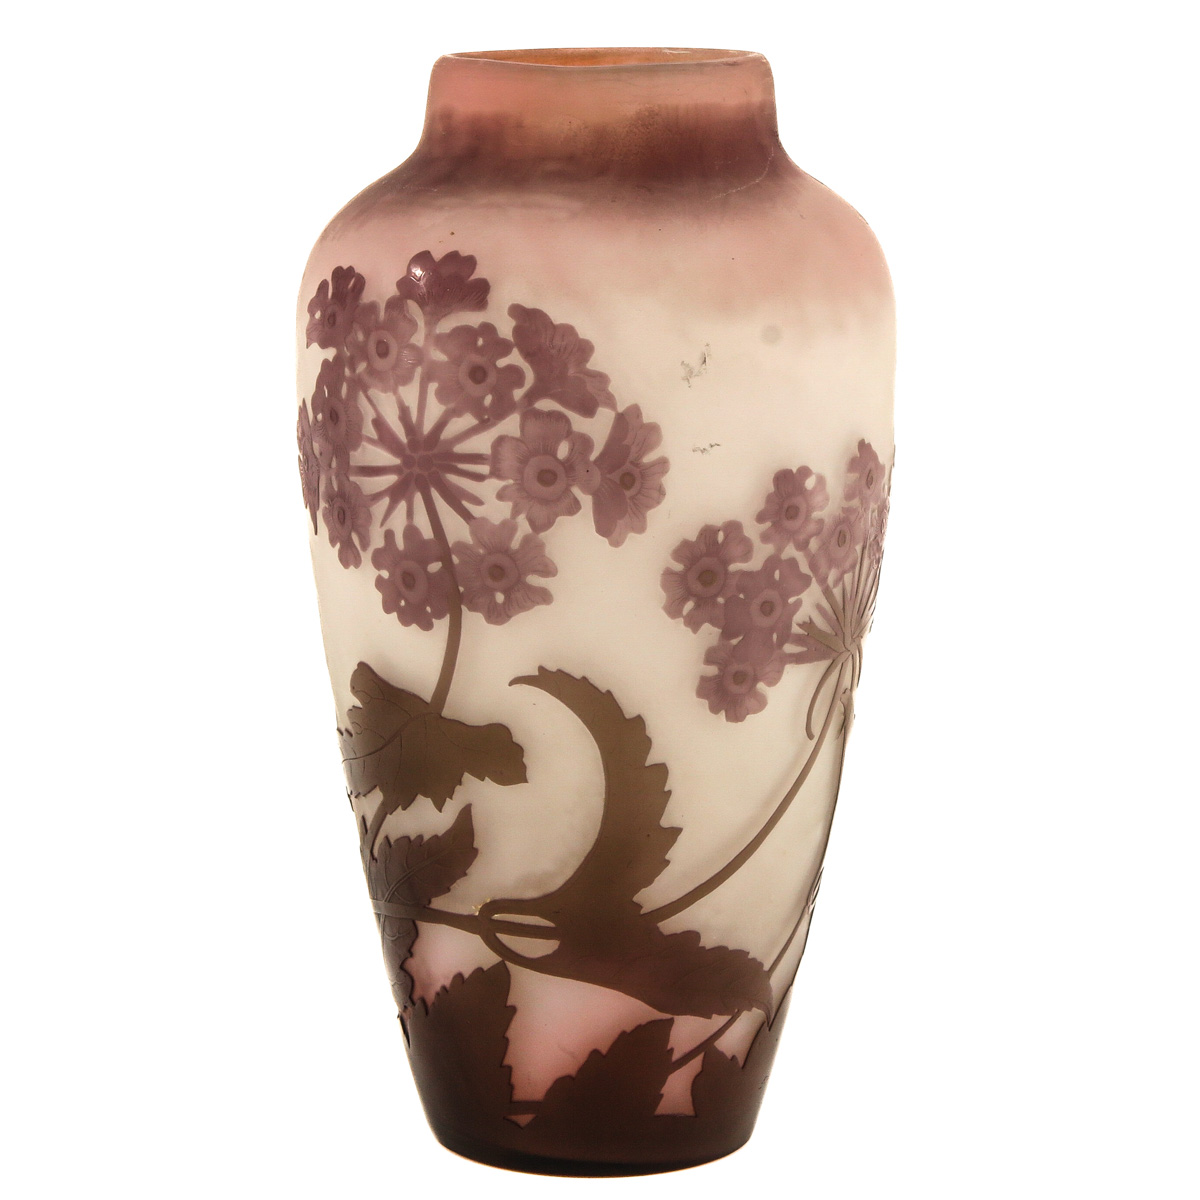 A Signed Galle' Vase - Image 3 of 9